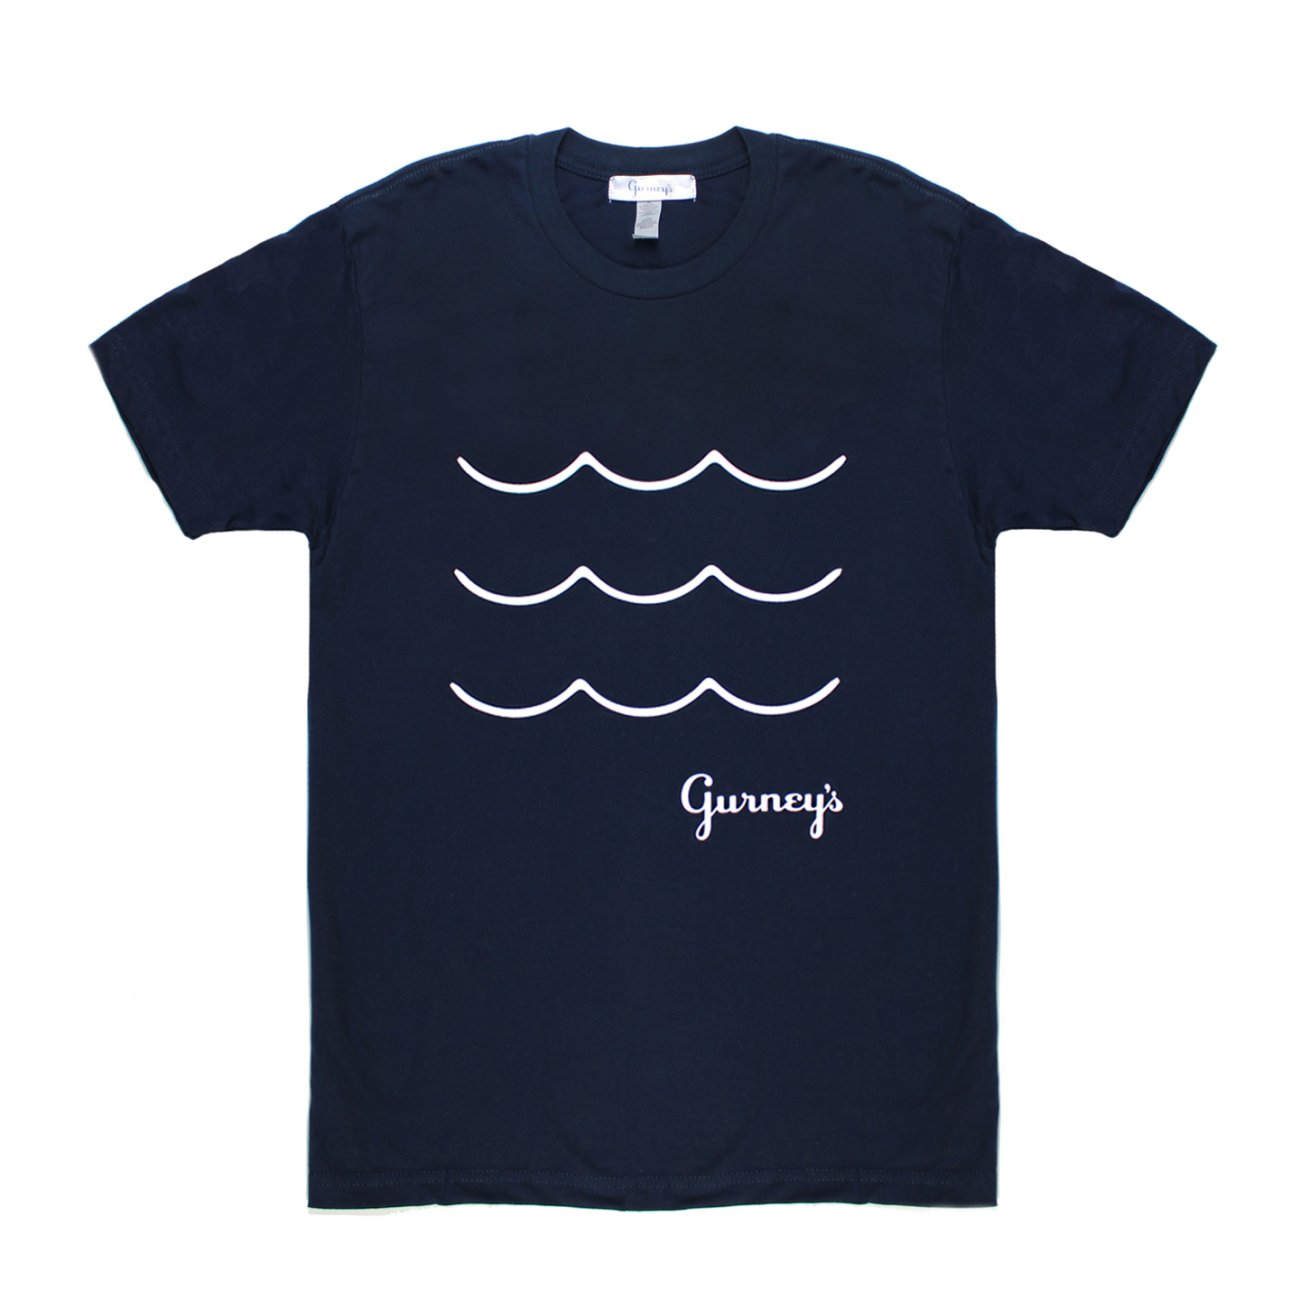 Gurney's T-shirt Wave screened across chest front navy